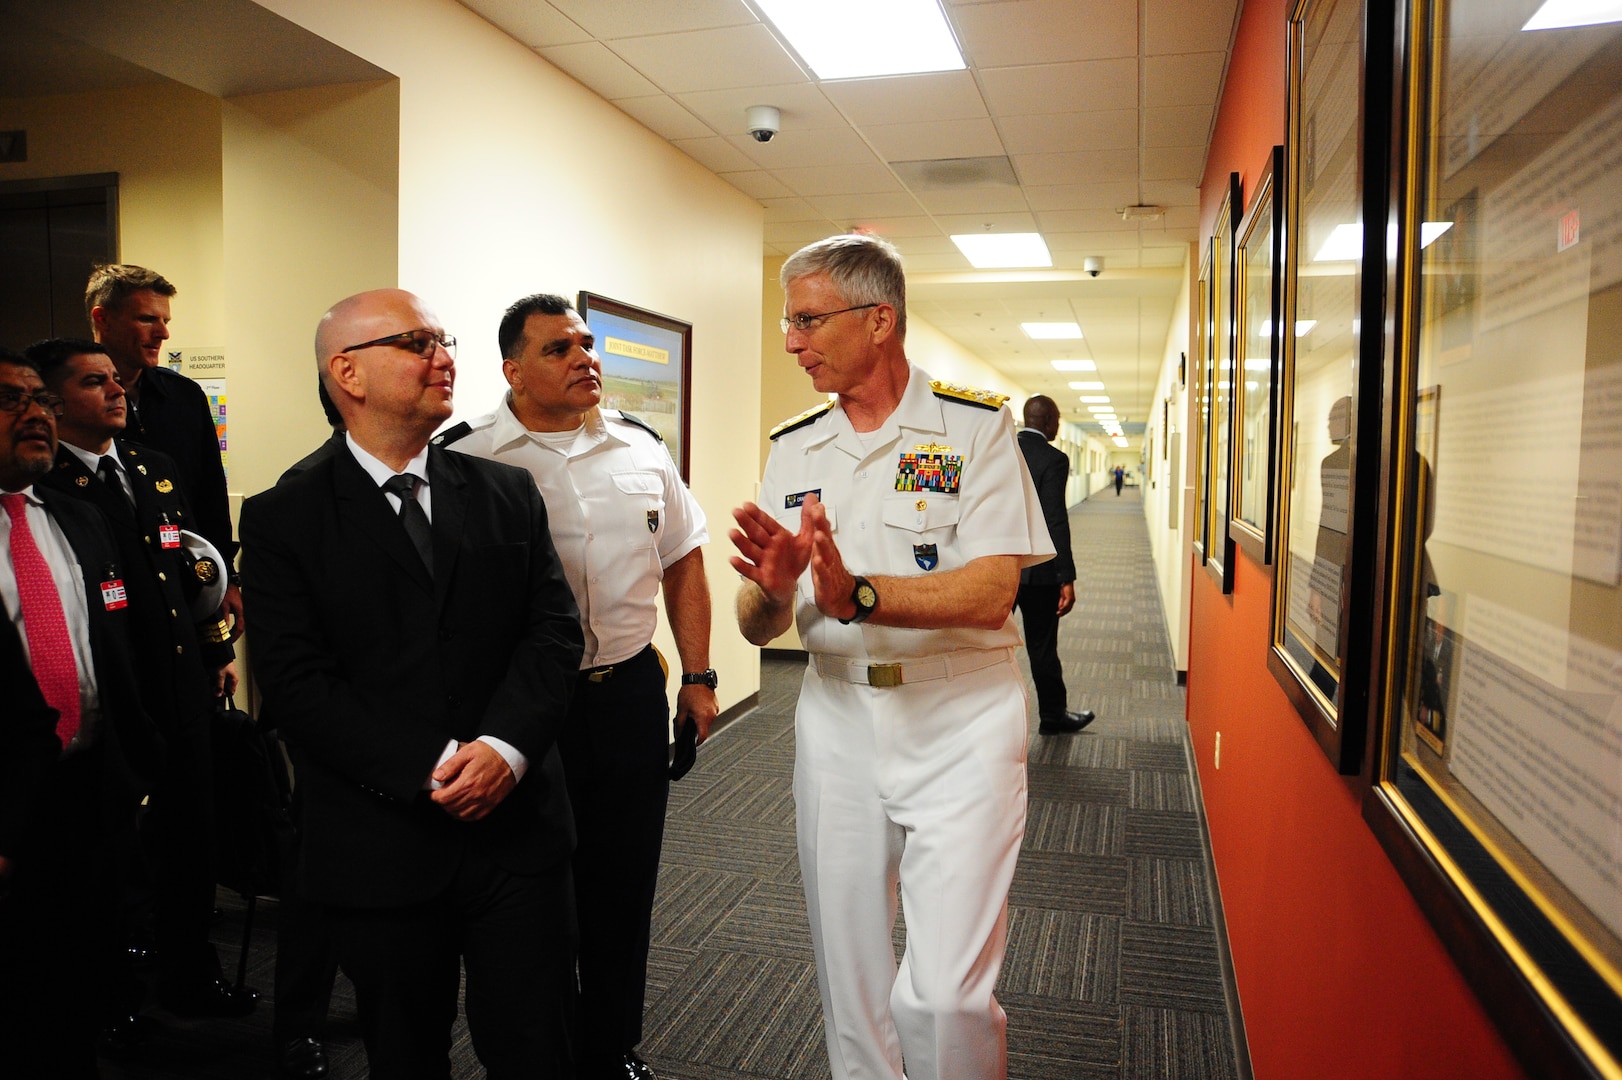 The commander of U.S. Southern Command, Navy Adm. Craig Faller, talks with Costa Rica's Minister of Public Security Michael Soto Rojas at SOUTHCOM headquarters.